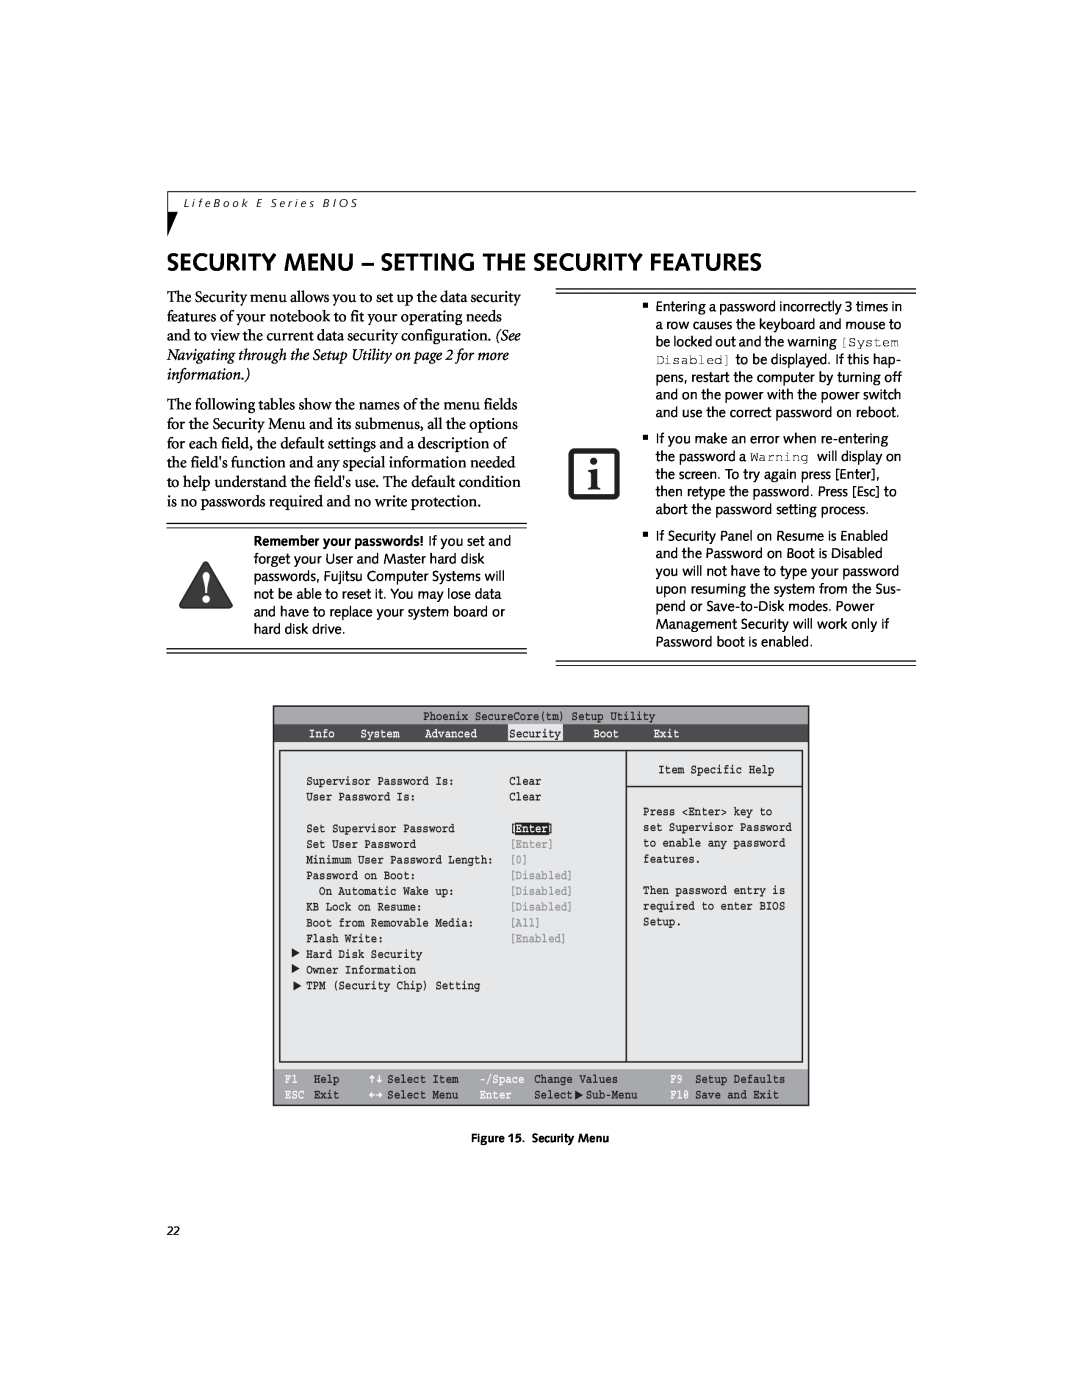 Fujitsu Siemens Computers E8420 manual Security Menu - Setting The Security Features, Disabled 